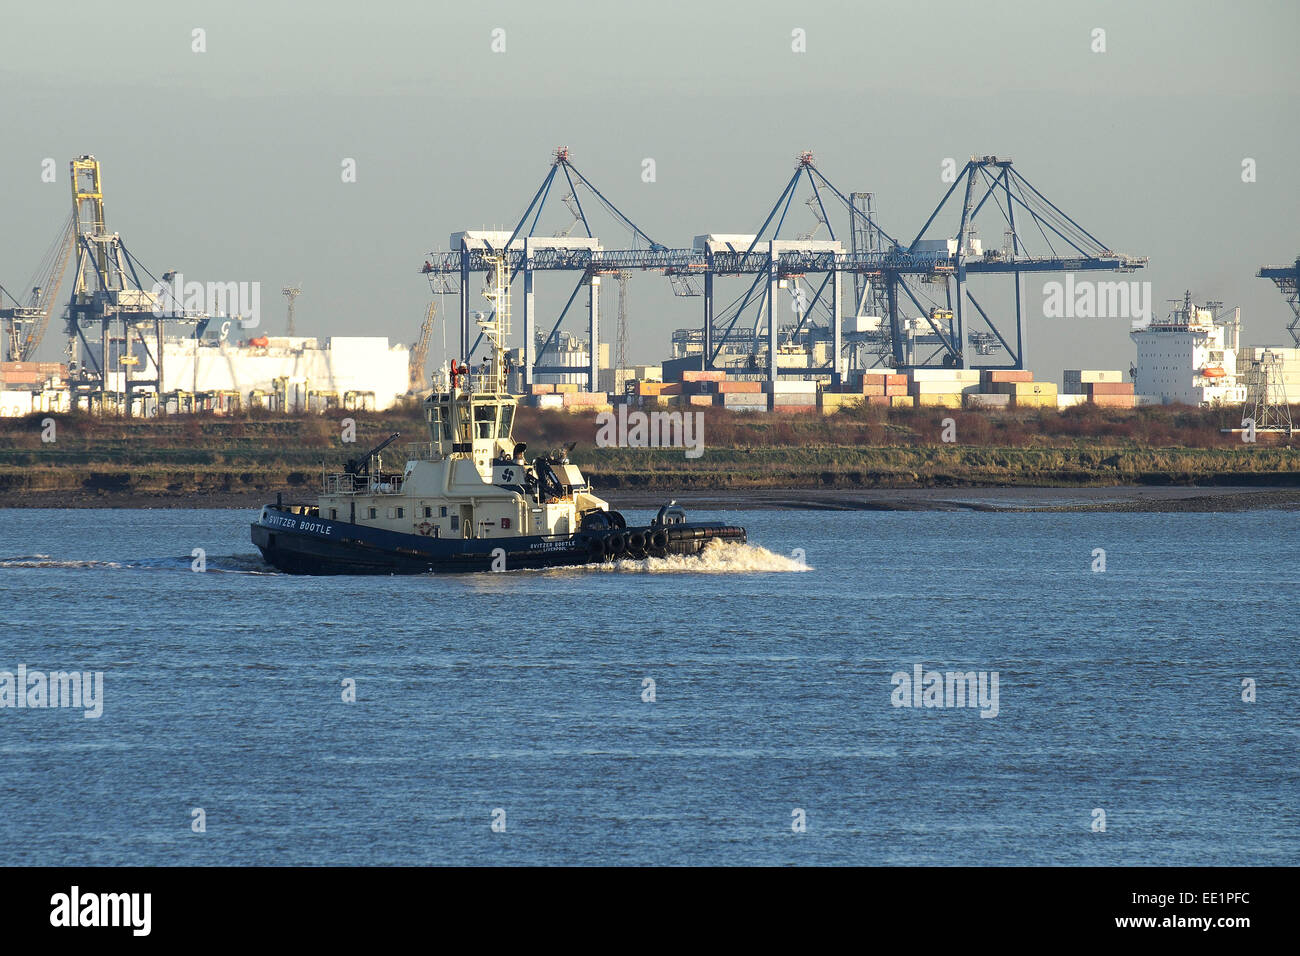 The tug, Svitzer Bootle, steaming upriver on the River Thames. Stock Photo